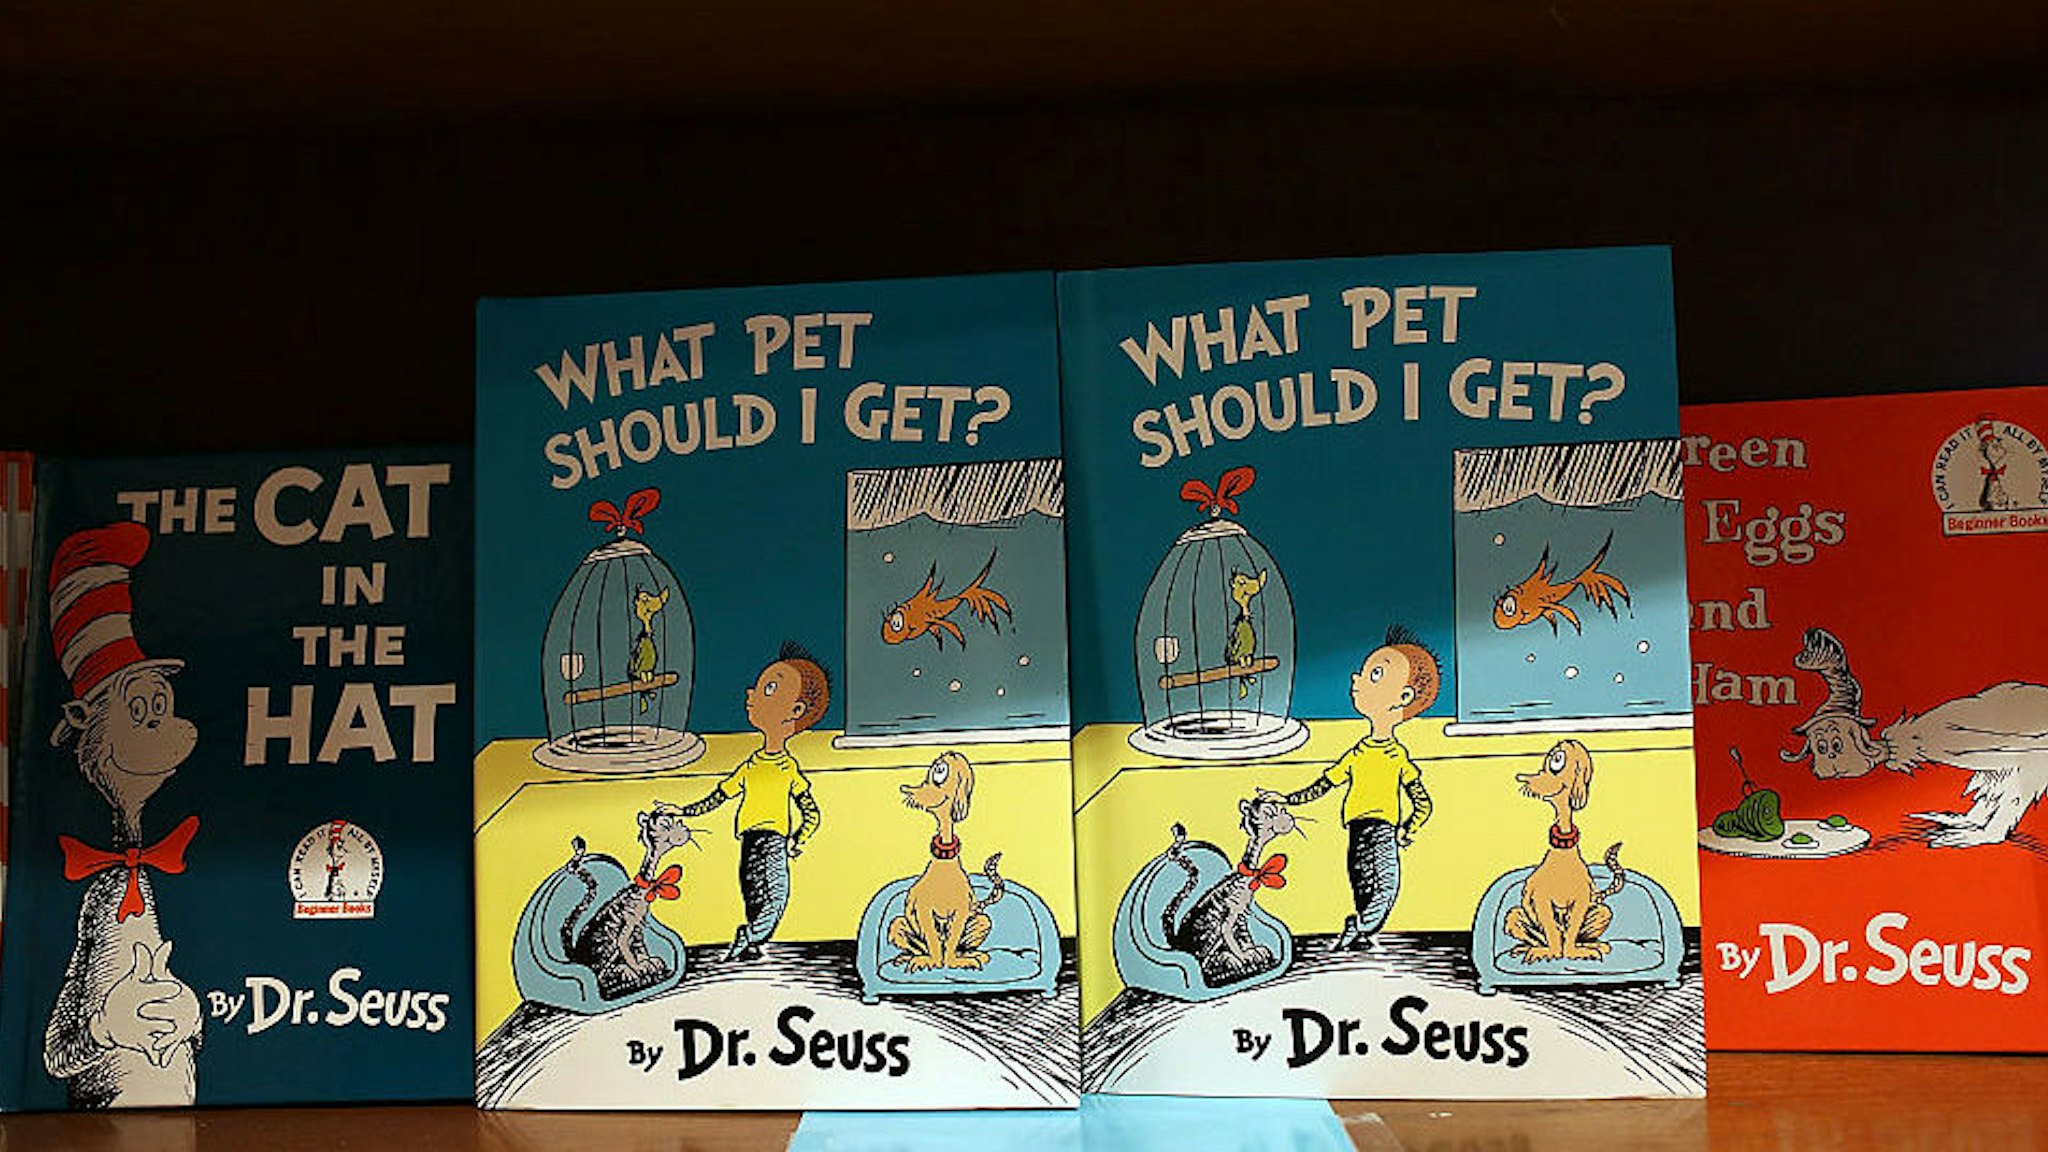 Dr. Seuss' never-before-published book, "What Pet Should I Get?" is seen on display on the day it is released for sale at the Books and Books store on July 28, 2015 in Coral Gables, United States.